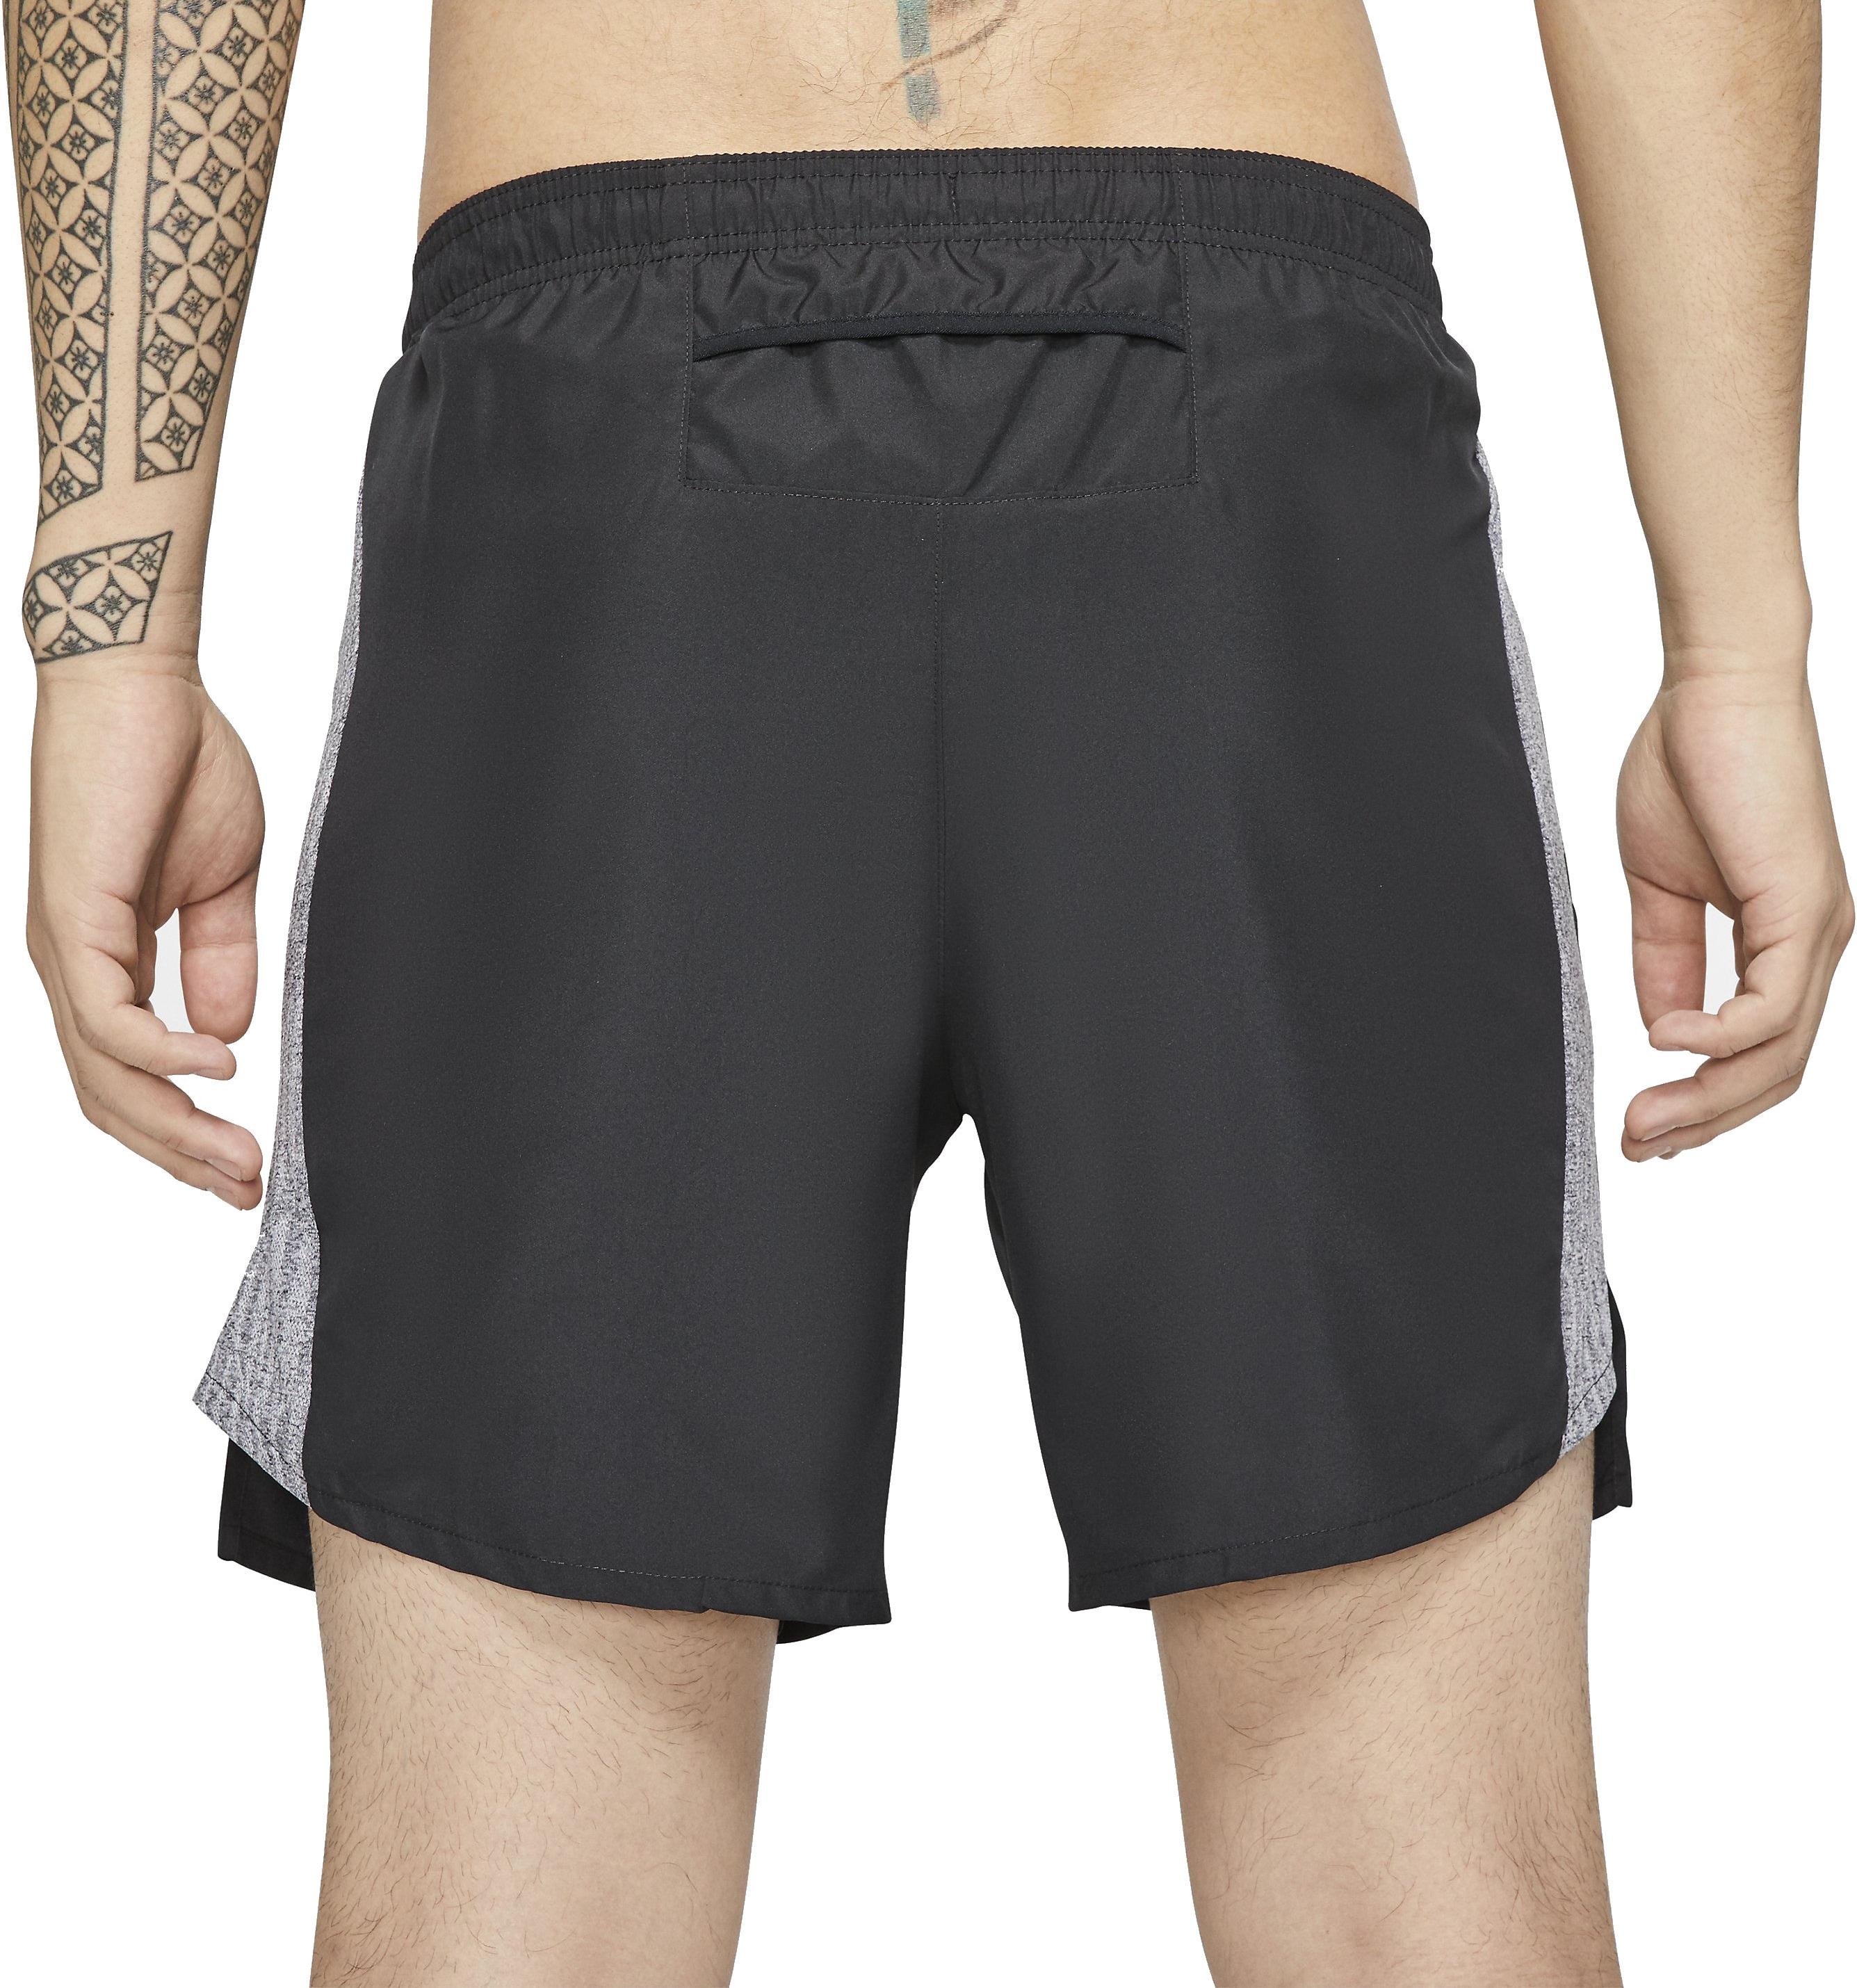 nike m nk chllgr short bf 7in